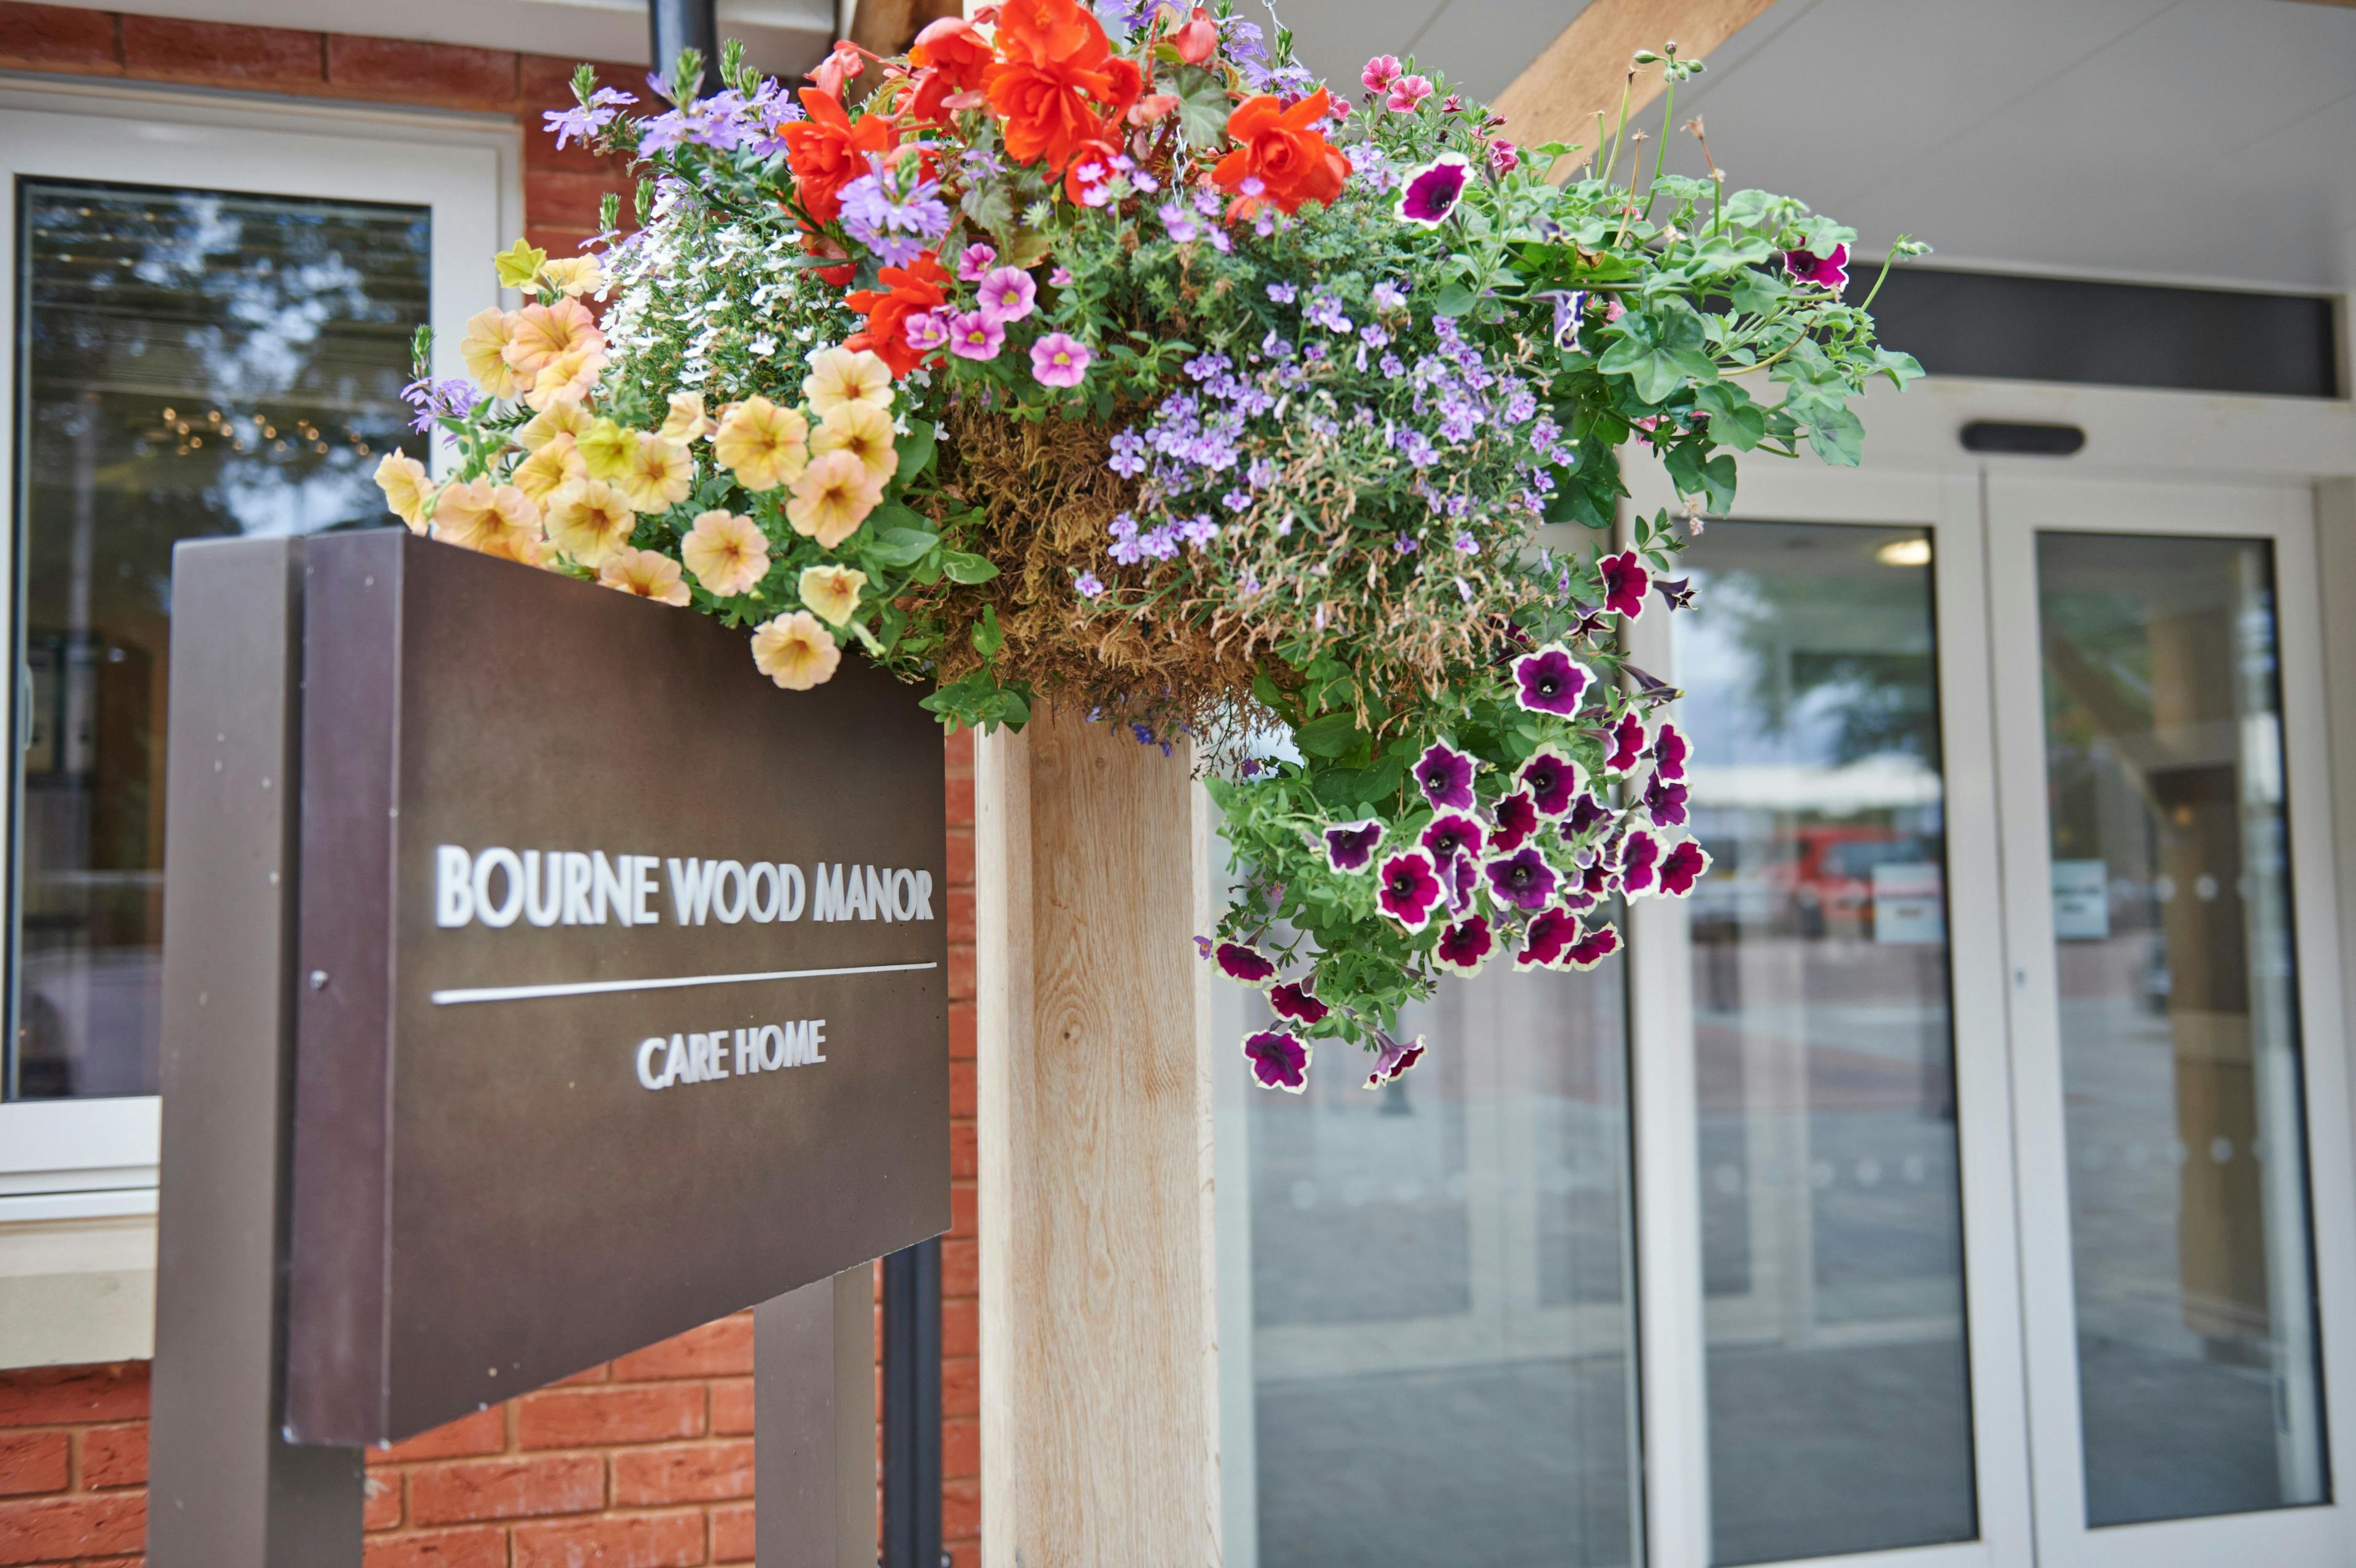 Porthaven Care Homes - Bourne Wood Manor care home 3